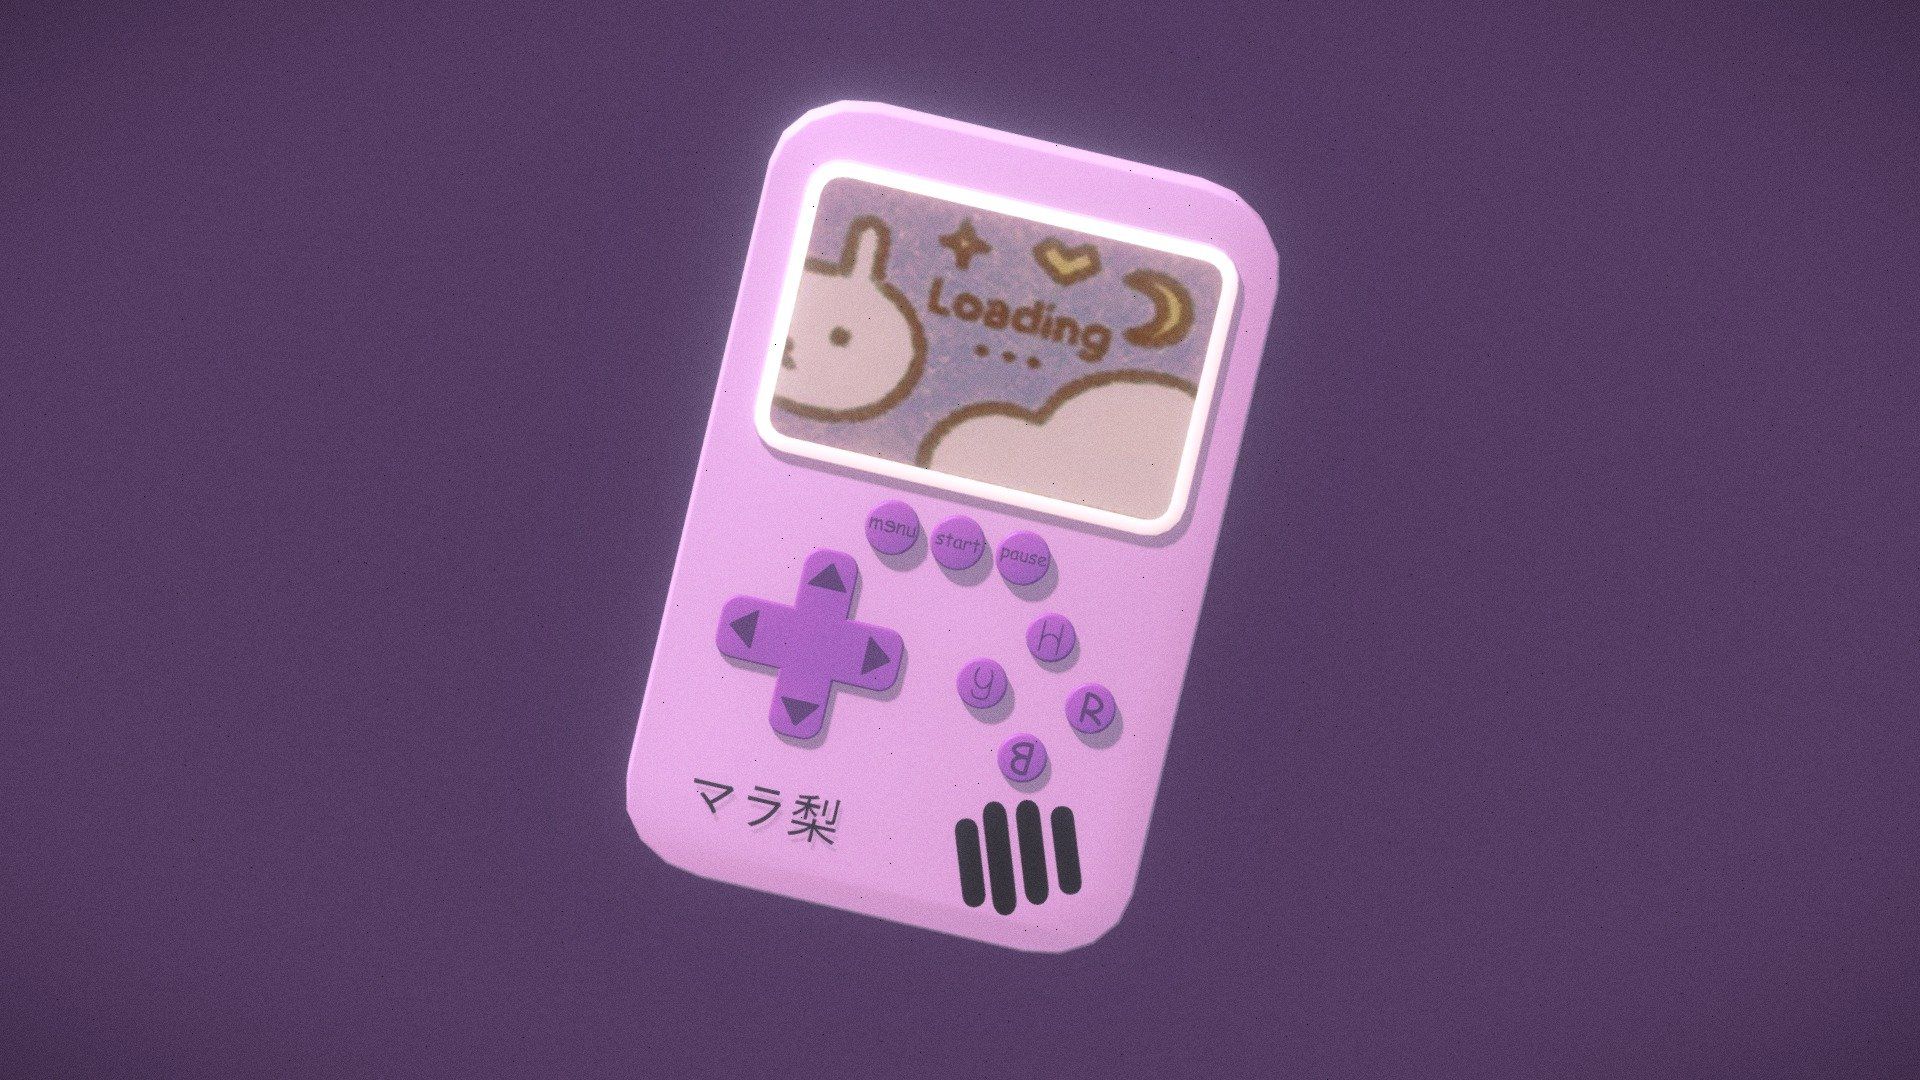 Chillpeach Loading Gameboy model by Laura Zaguini Pereira [a867ded]